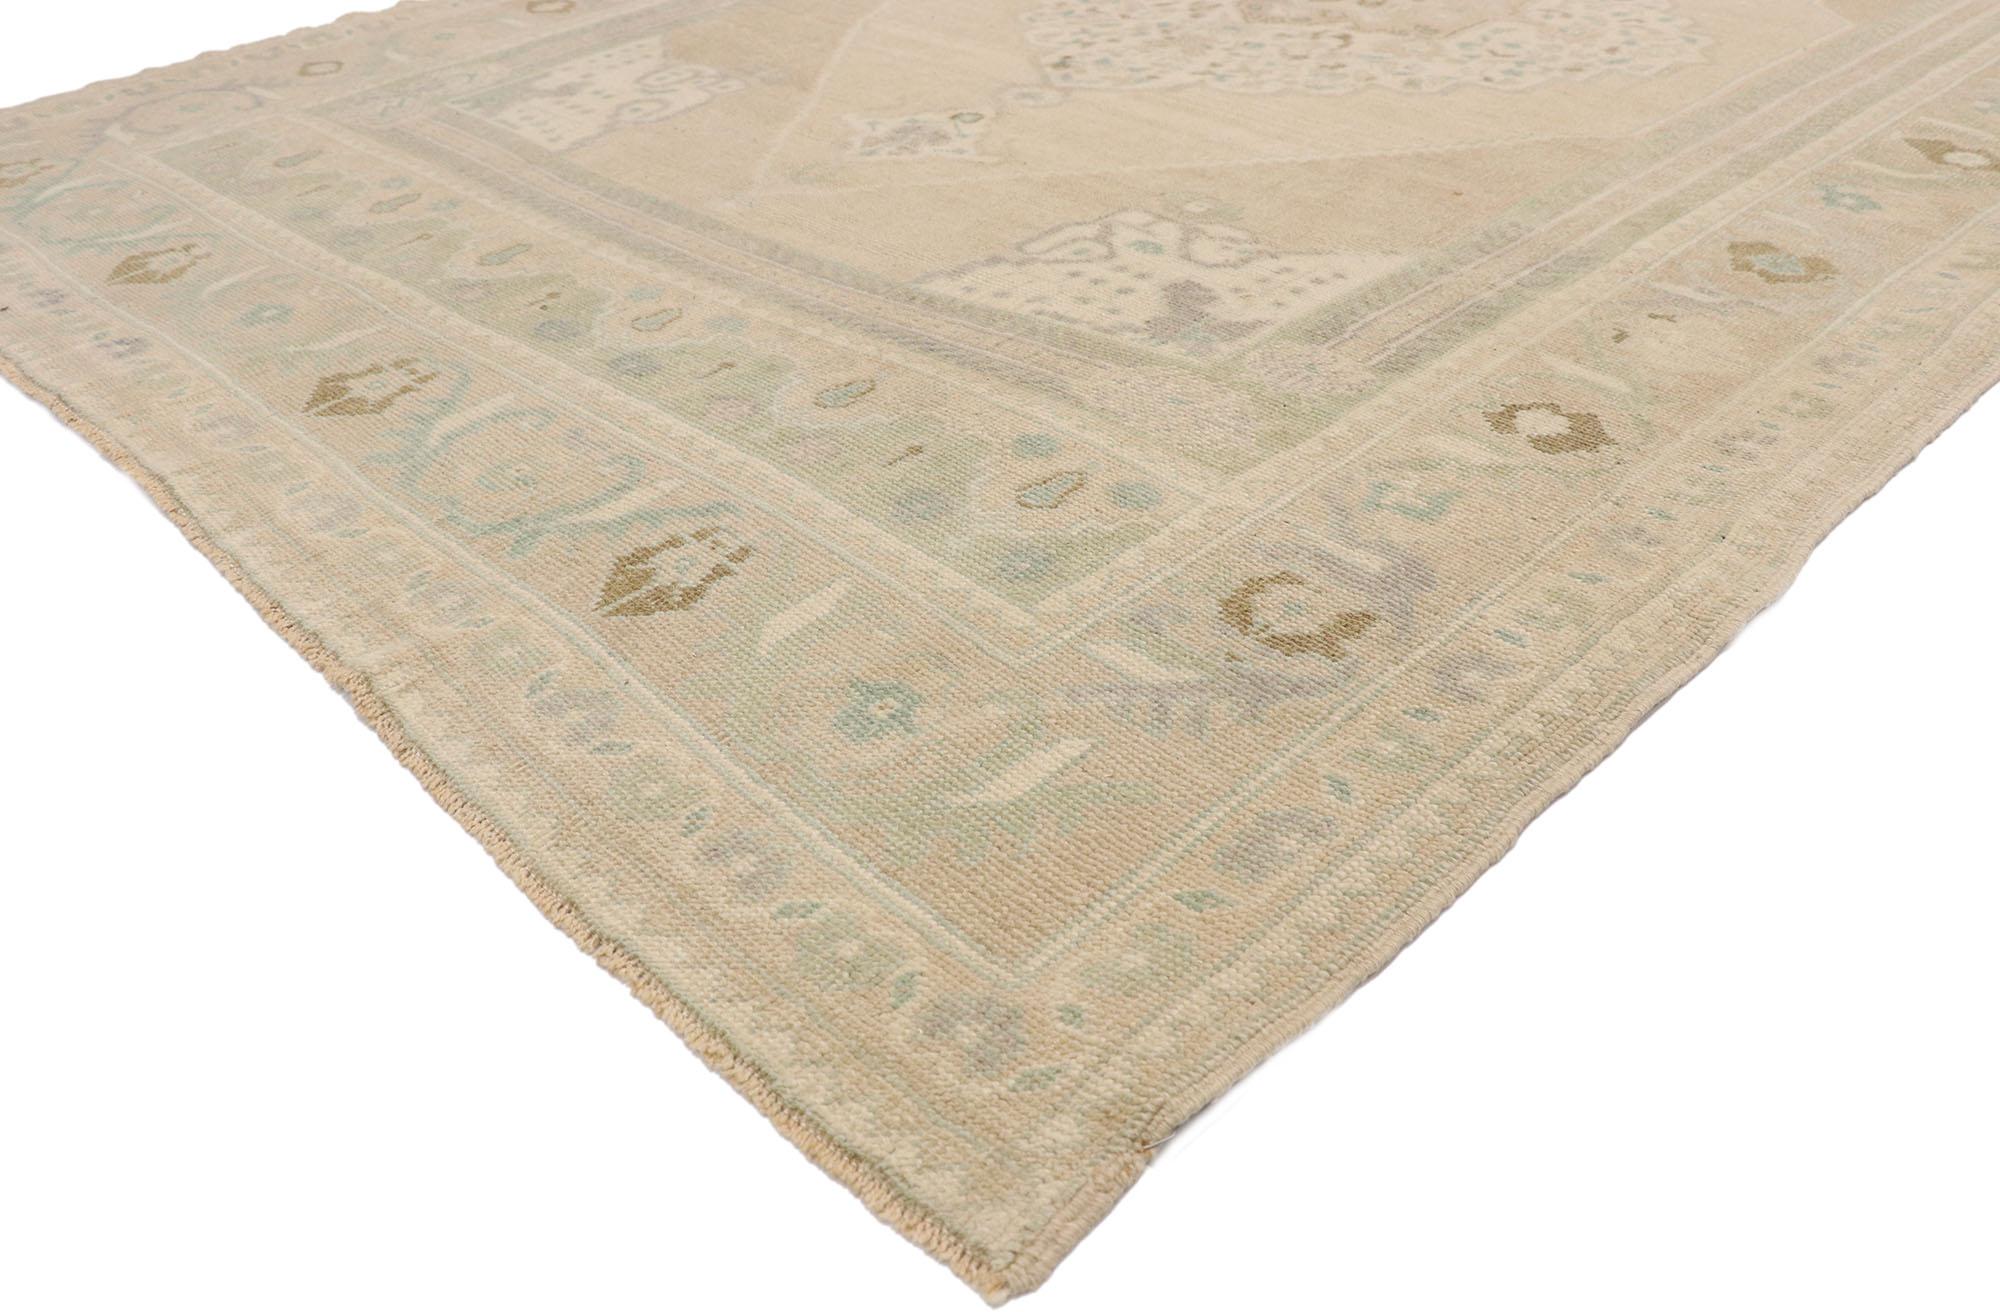 58210 Muted Vintage Turkish Oushak Rug, 05'11 x 09'04.
Quiet luxe meets calm cohension in this hand knotted wool vintage Turkish Oushak rug. The intricate botanical design and soft earth-tone colors woven into this piece work together creating an